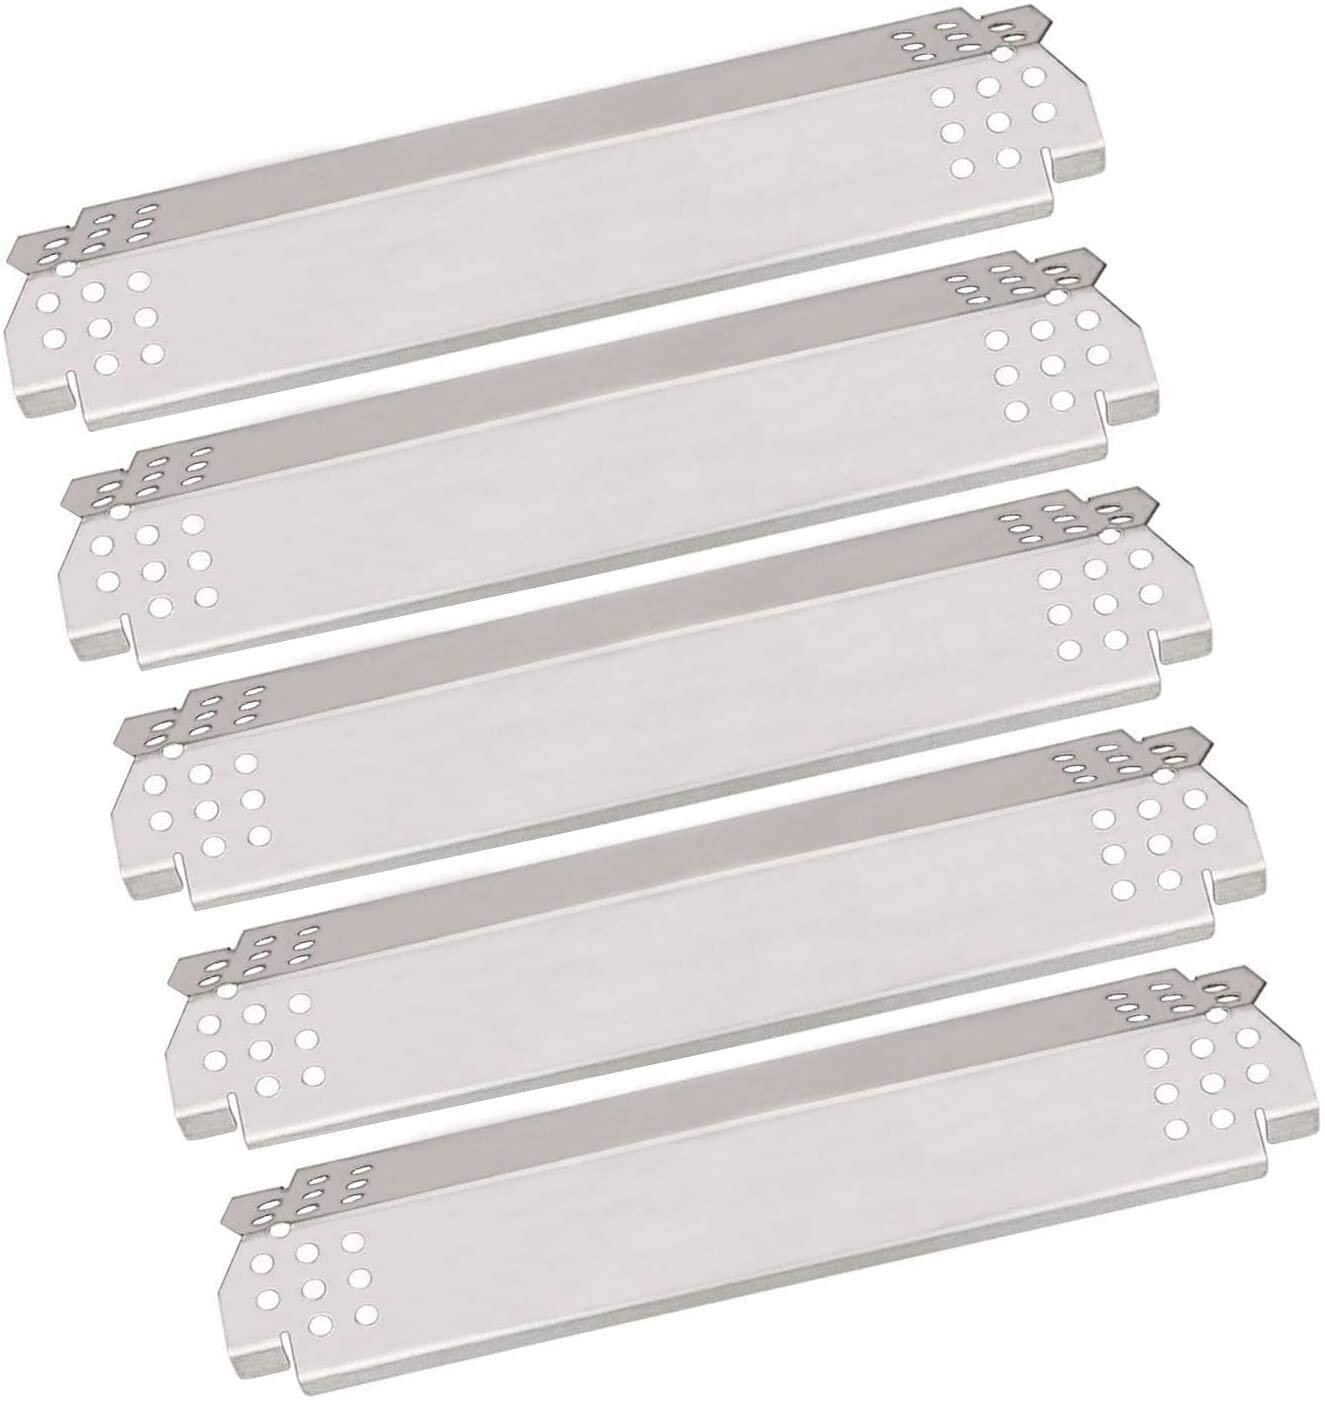 5 Burner 720-0888 720-0888N Stainless Steel Replacement for Nexgrill 720-0830H 